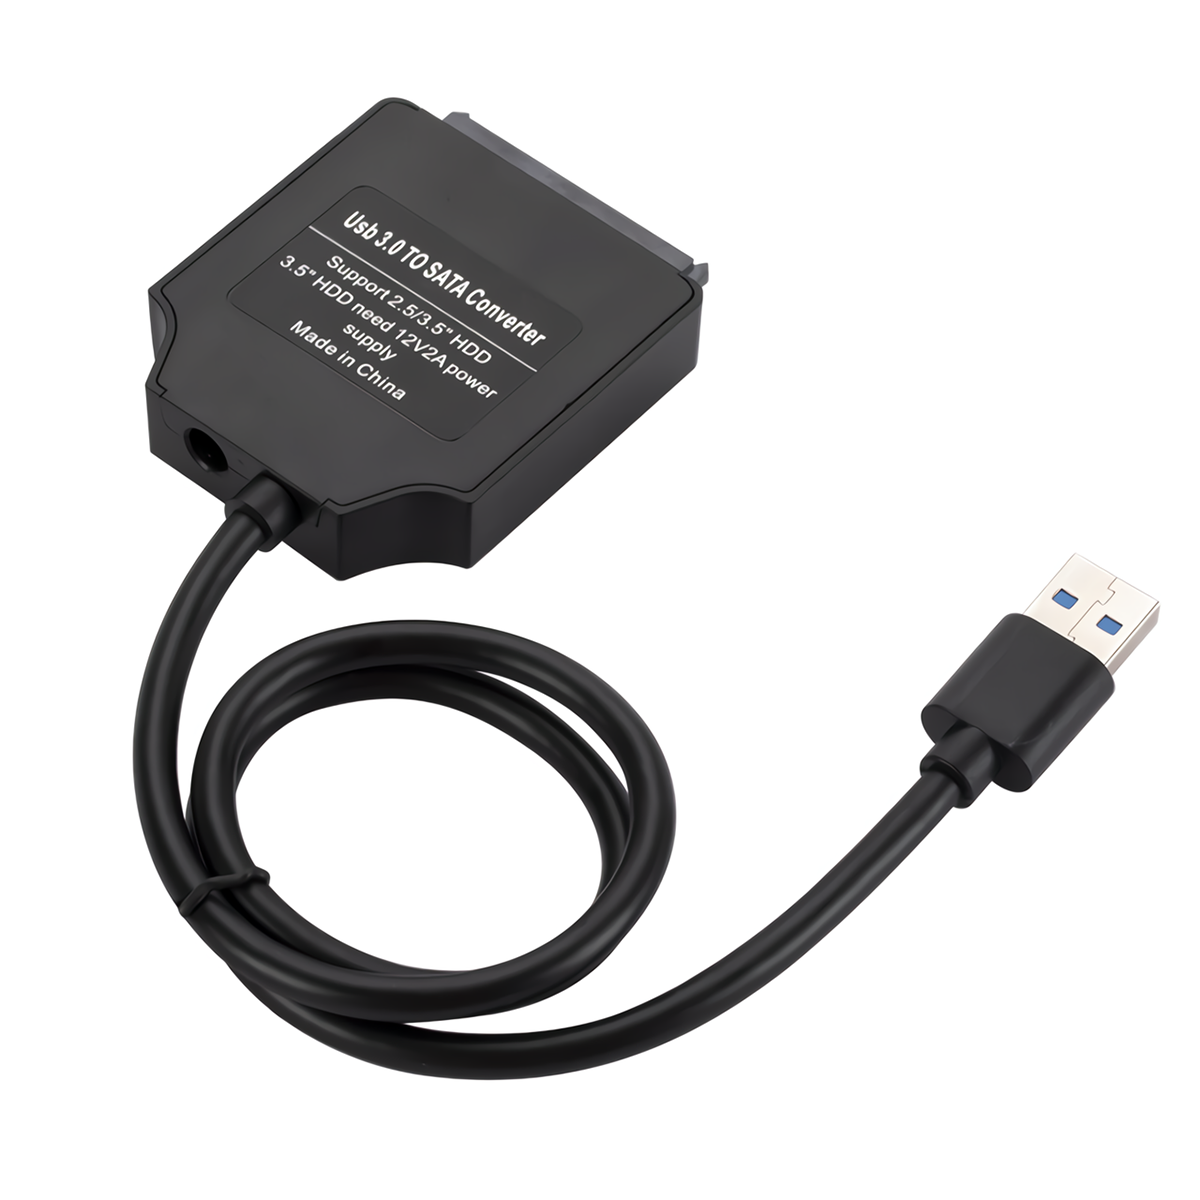 MnnWuu-SSD-HDD-USB-30-to-SATA-Converter-Cable-Hard-Drive-Converter-Adapter-Support-25--35quot-HDD-SS-1951620-2